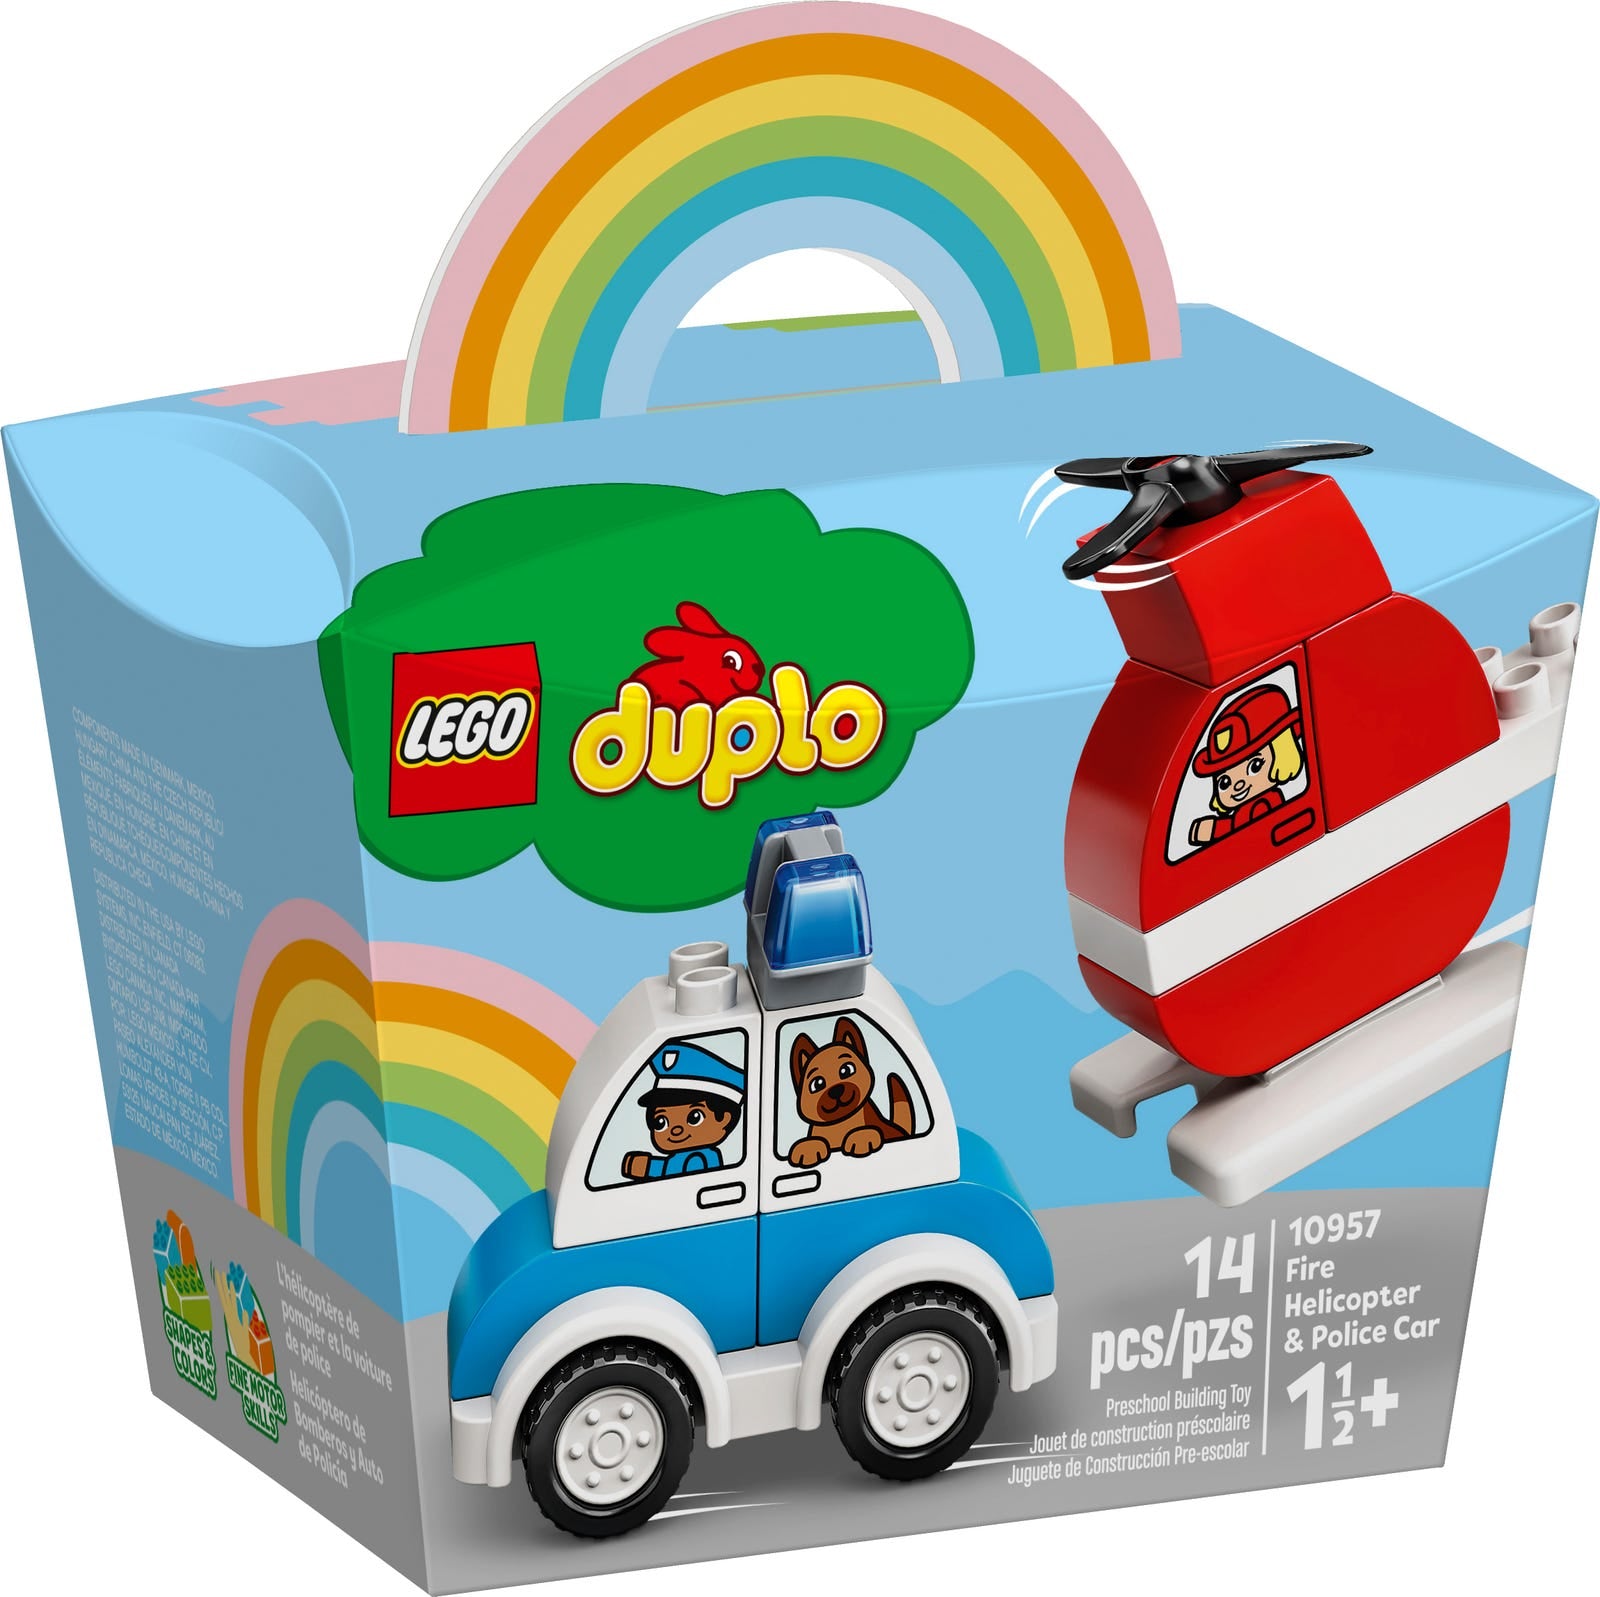 LEGO Duplo Fire Helicopter & Police Car 10957